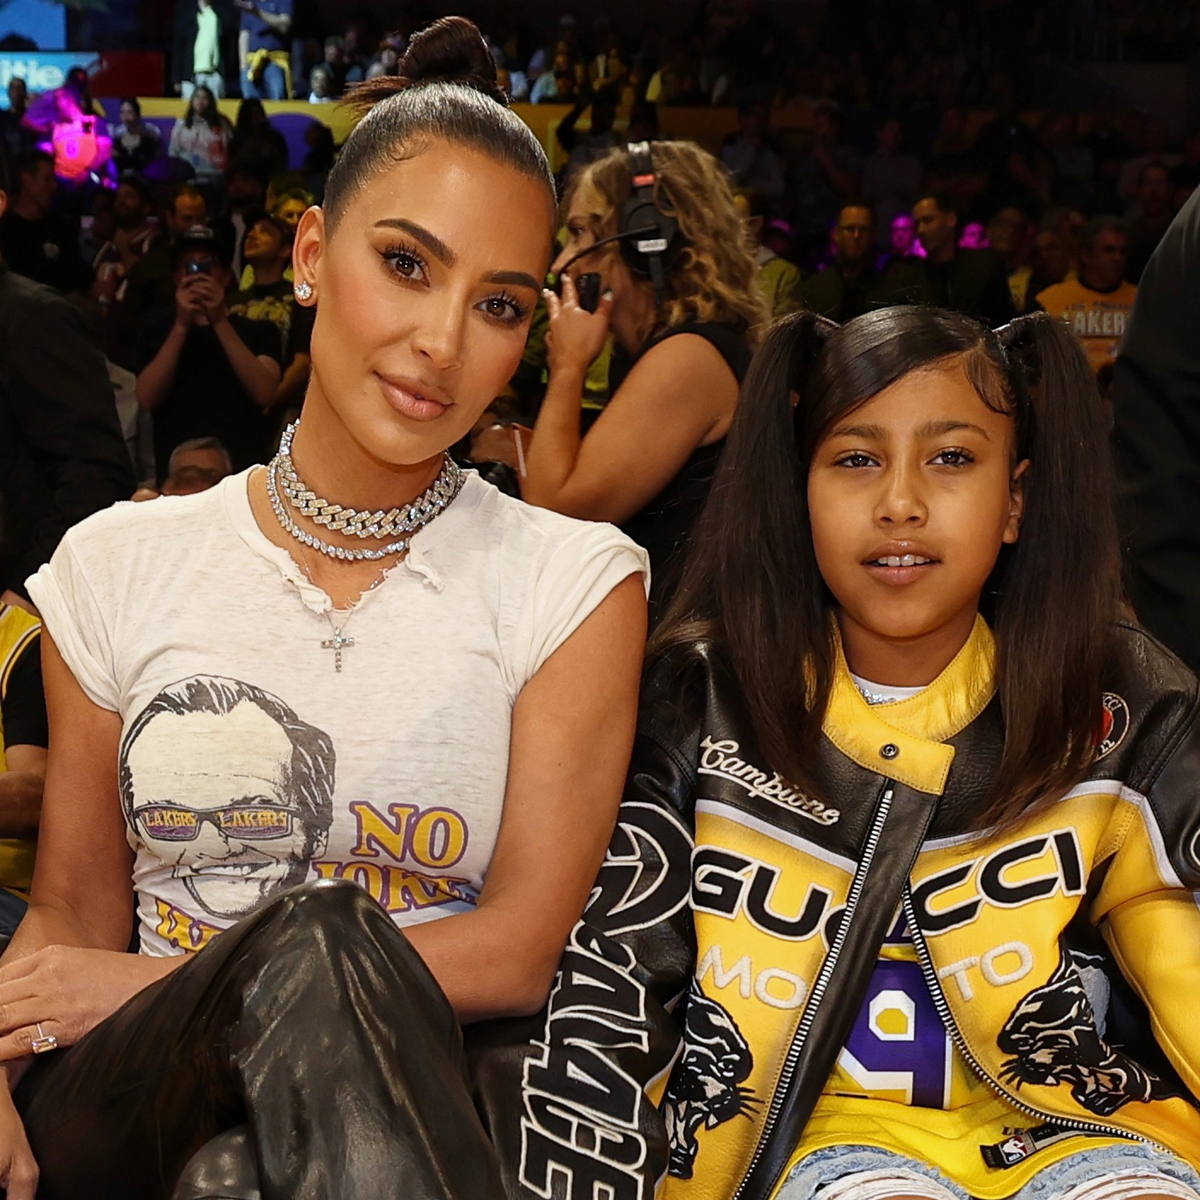 Photos from North West and Kim Kardashian Cheer on Tristan